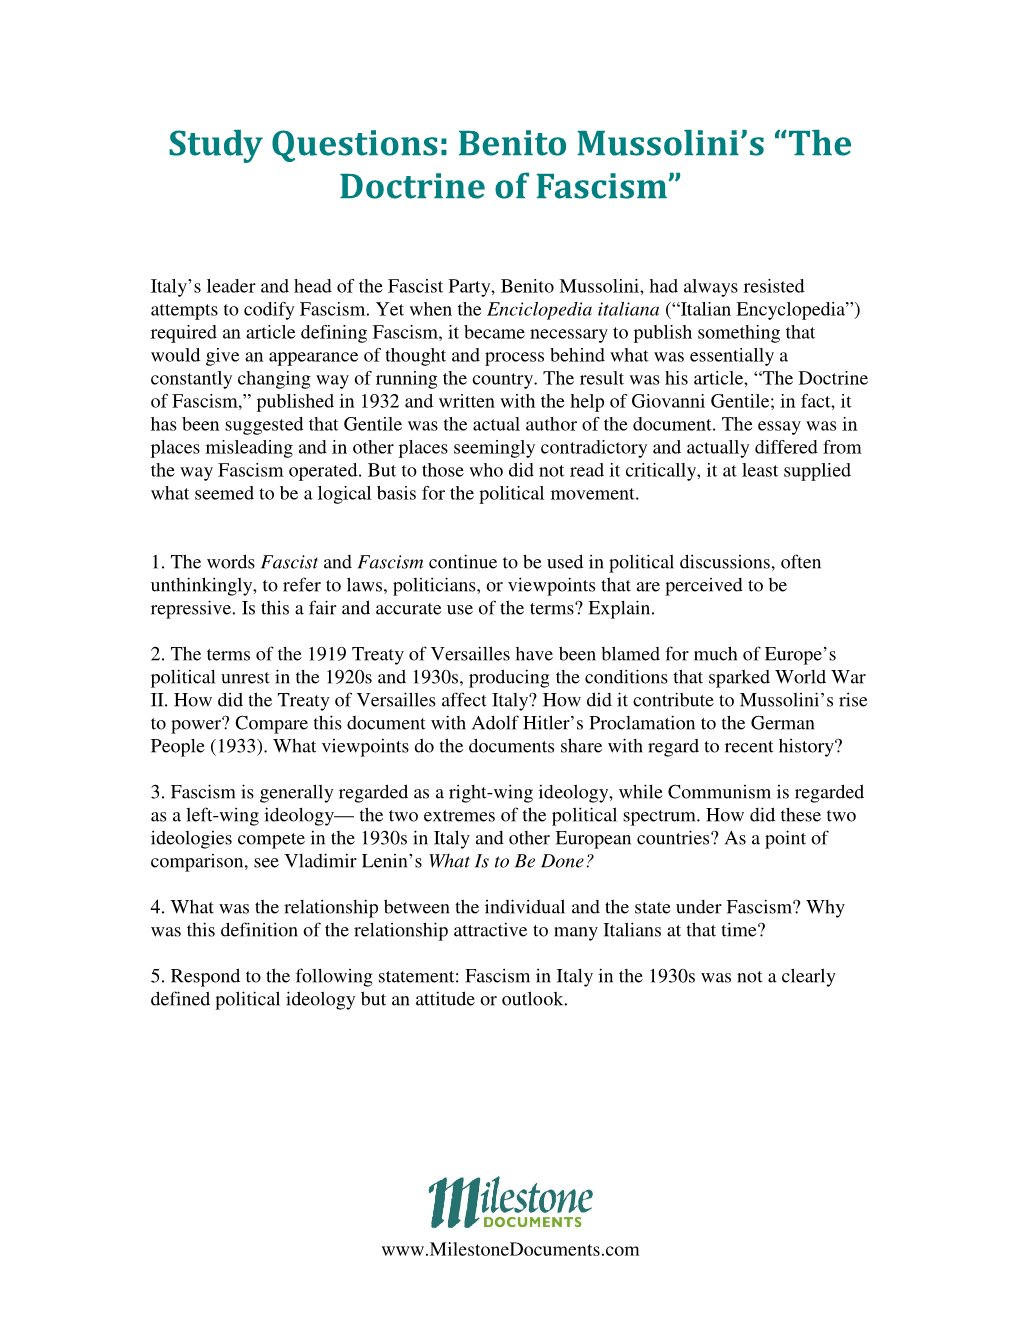 Study Questions: Benito Mussolini's “The Doctrine of Fascism”